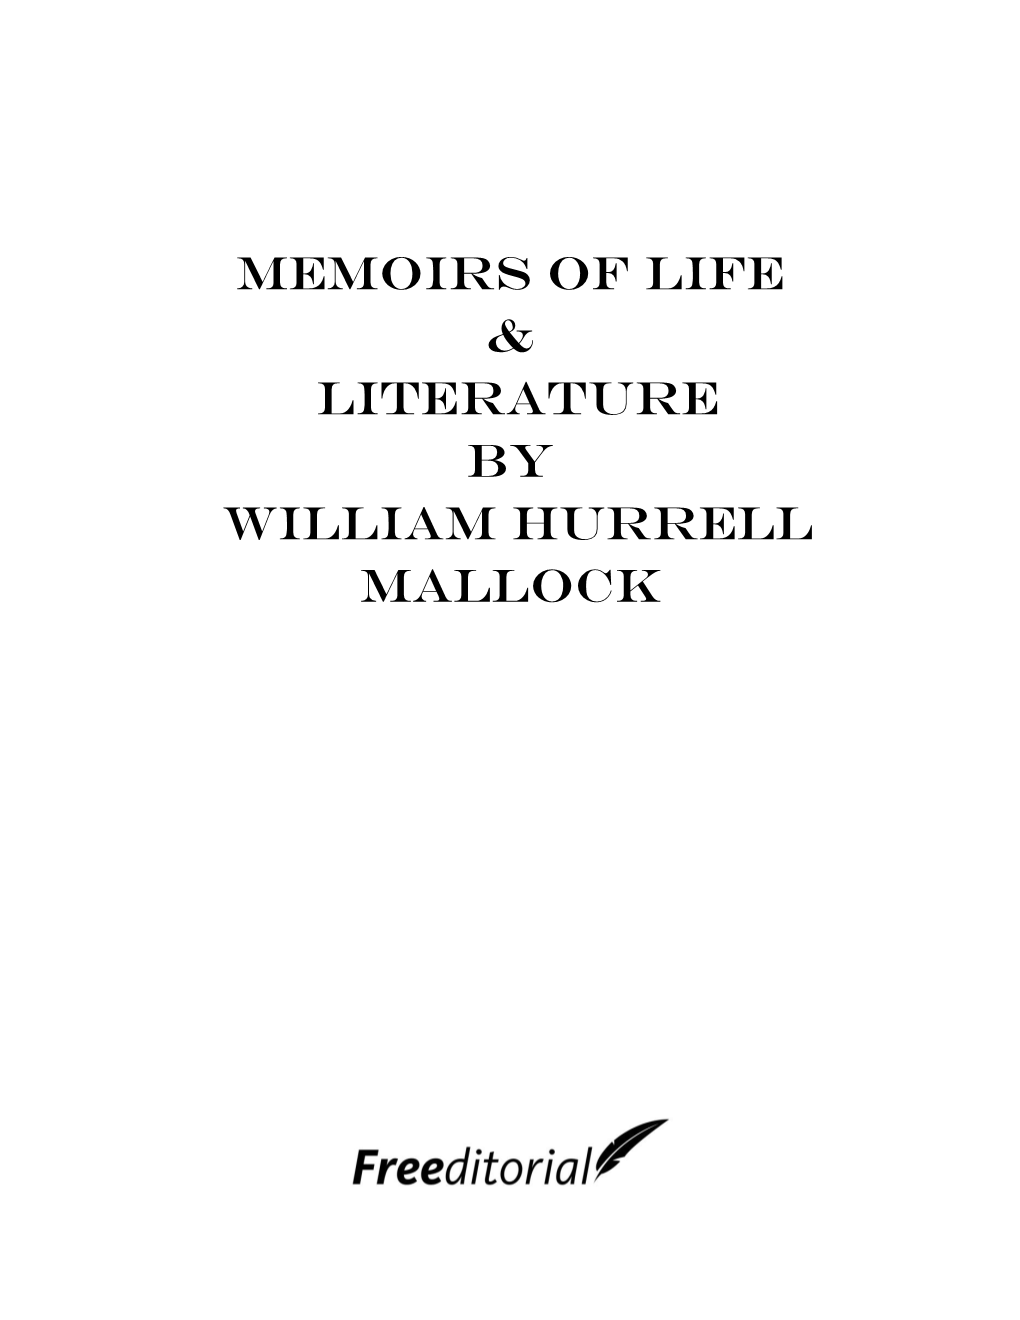 MEMOIRS of LIFE & LITERATURE by WILLIAM Hurrell MALLOCK